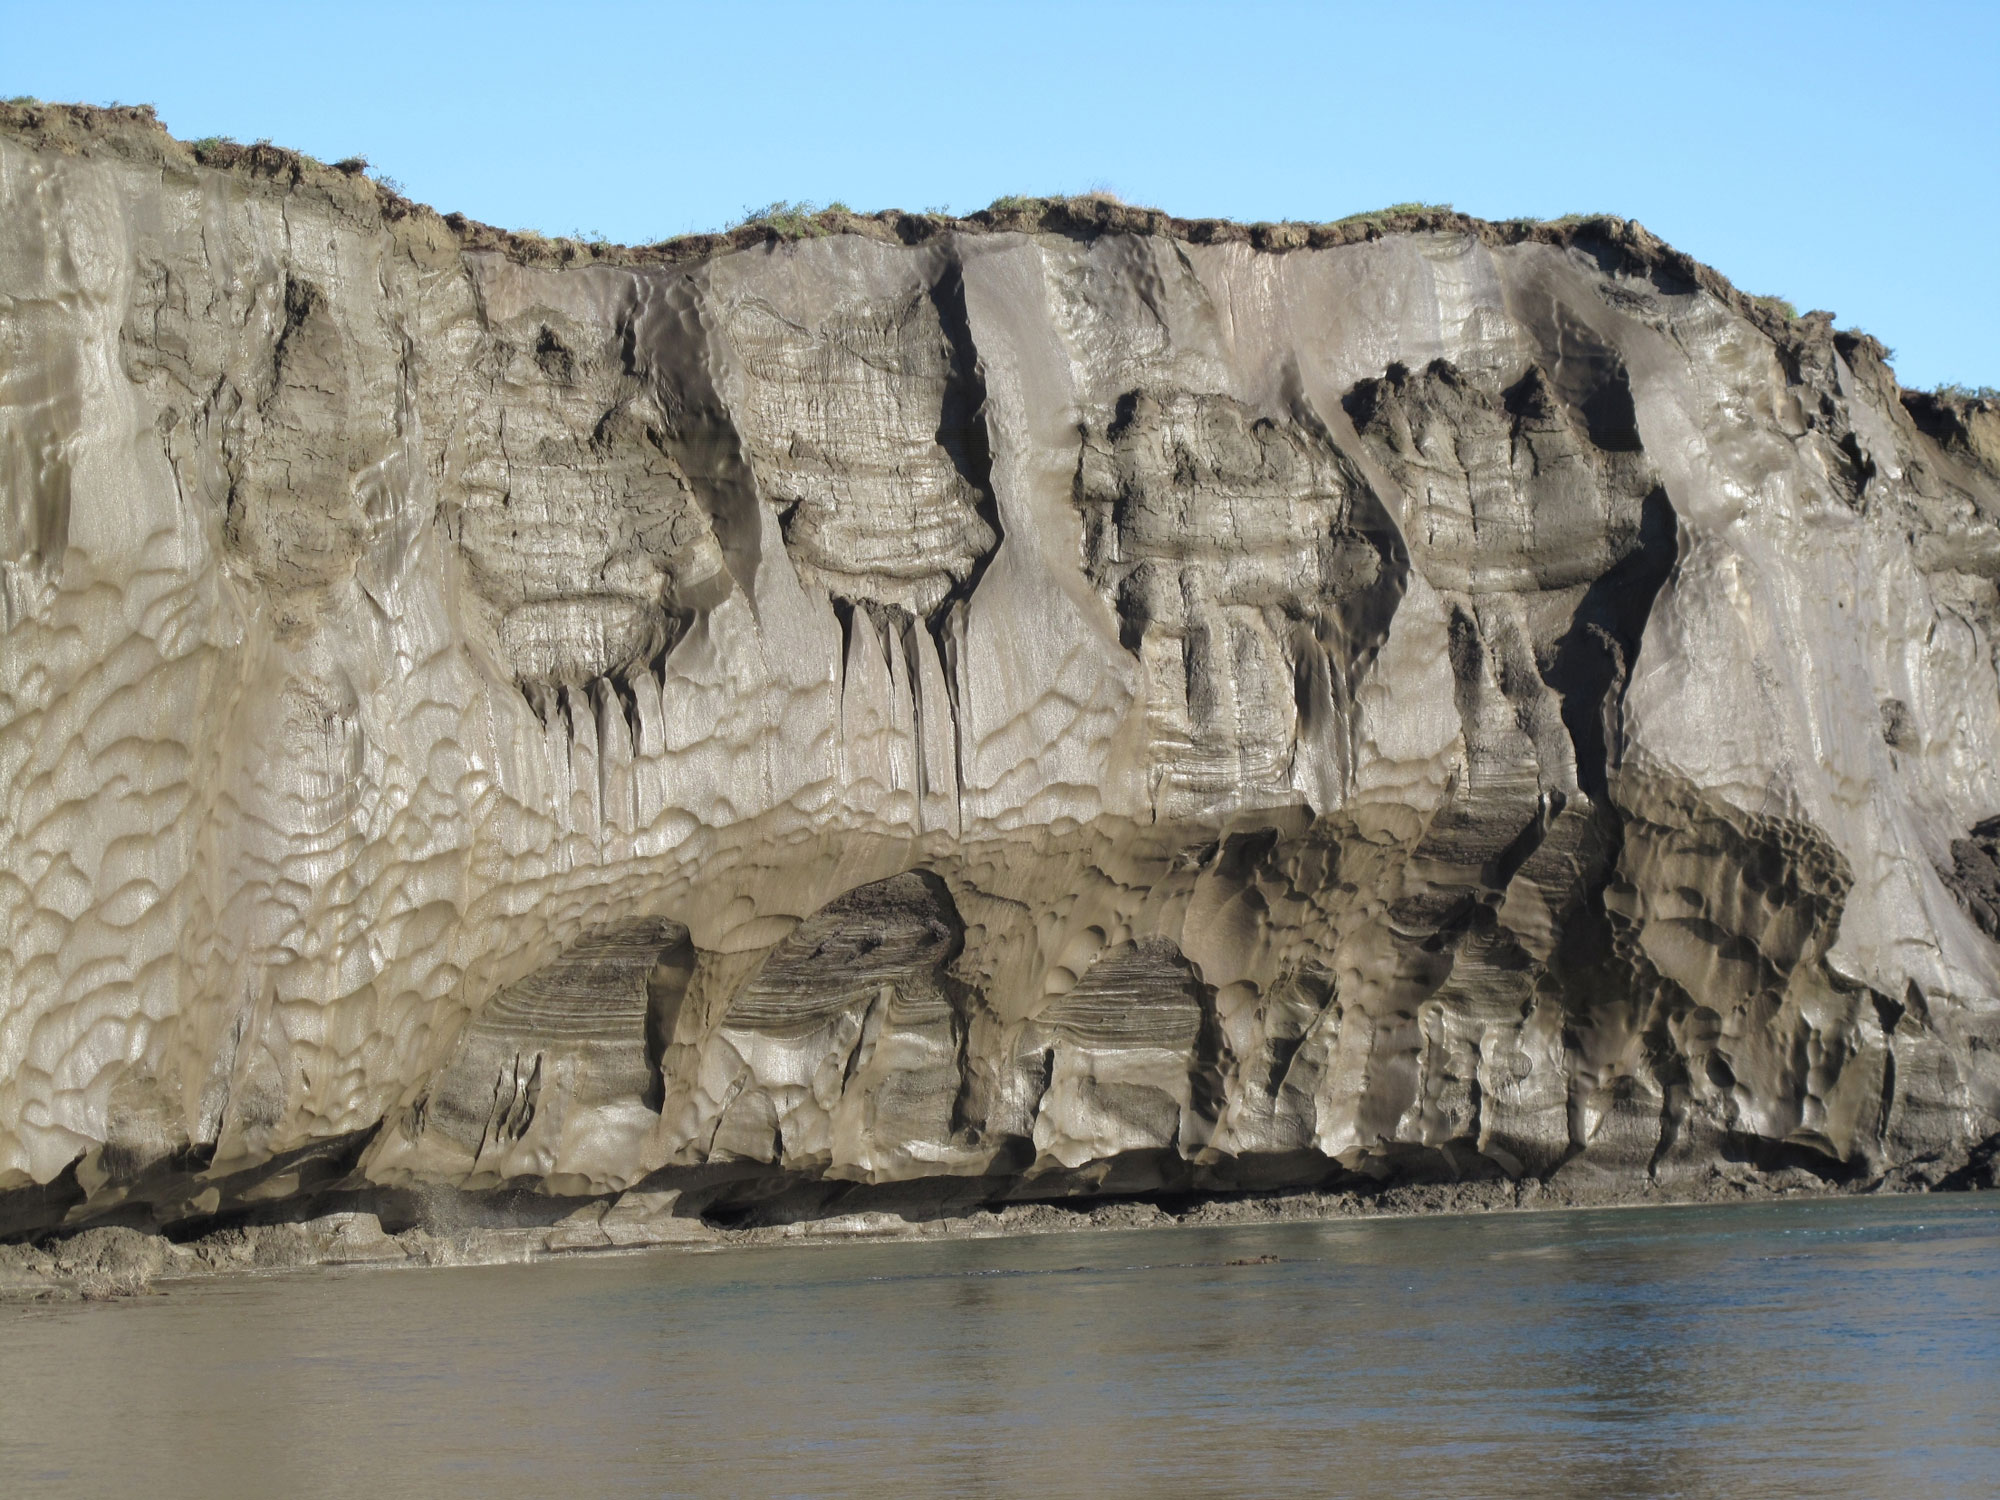 Photograph of permafrost exposed on a riverbank in Alaska. The photo shows a sheer bluff made up of brown ice with a rippled surface. A river can be seen at the base of the ice bluff.